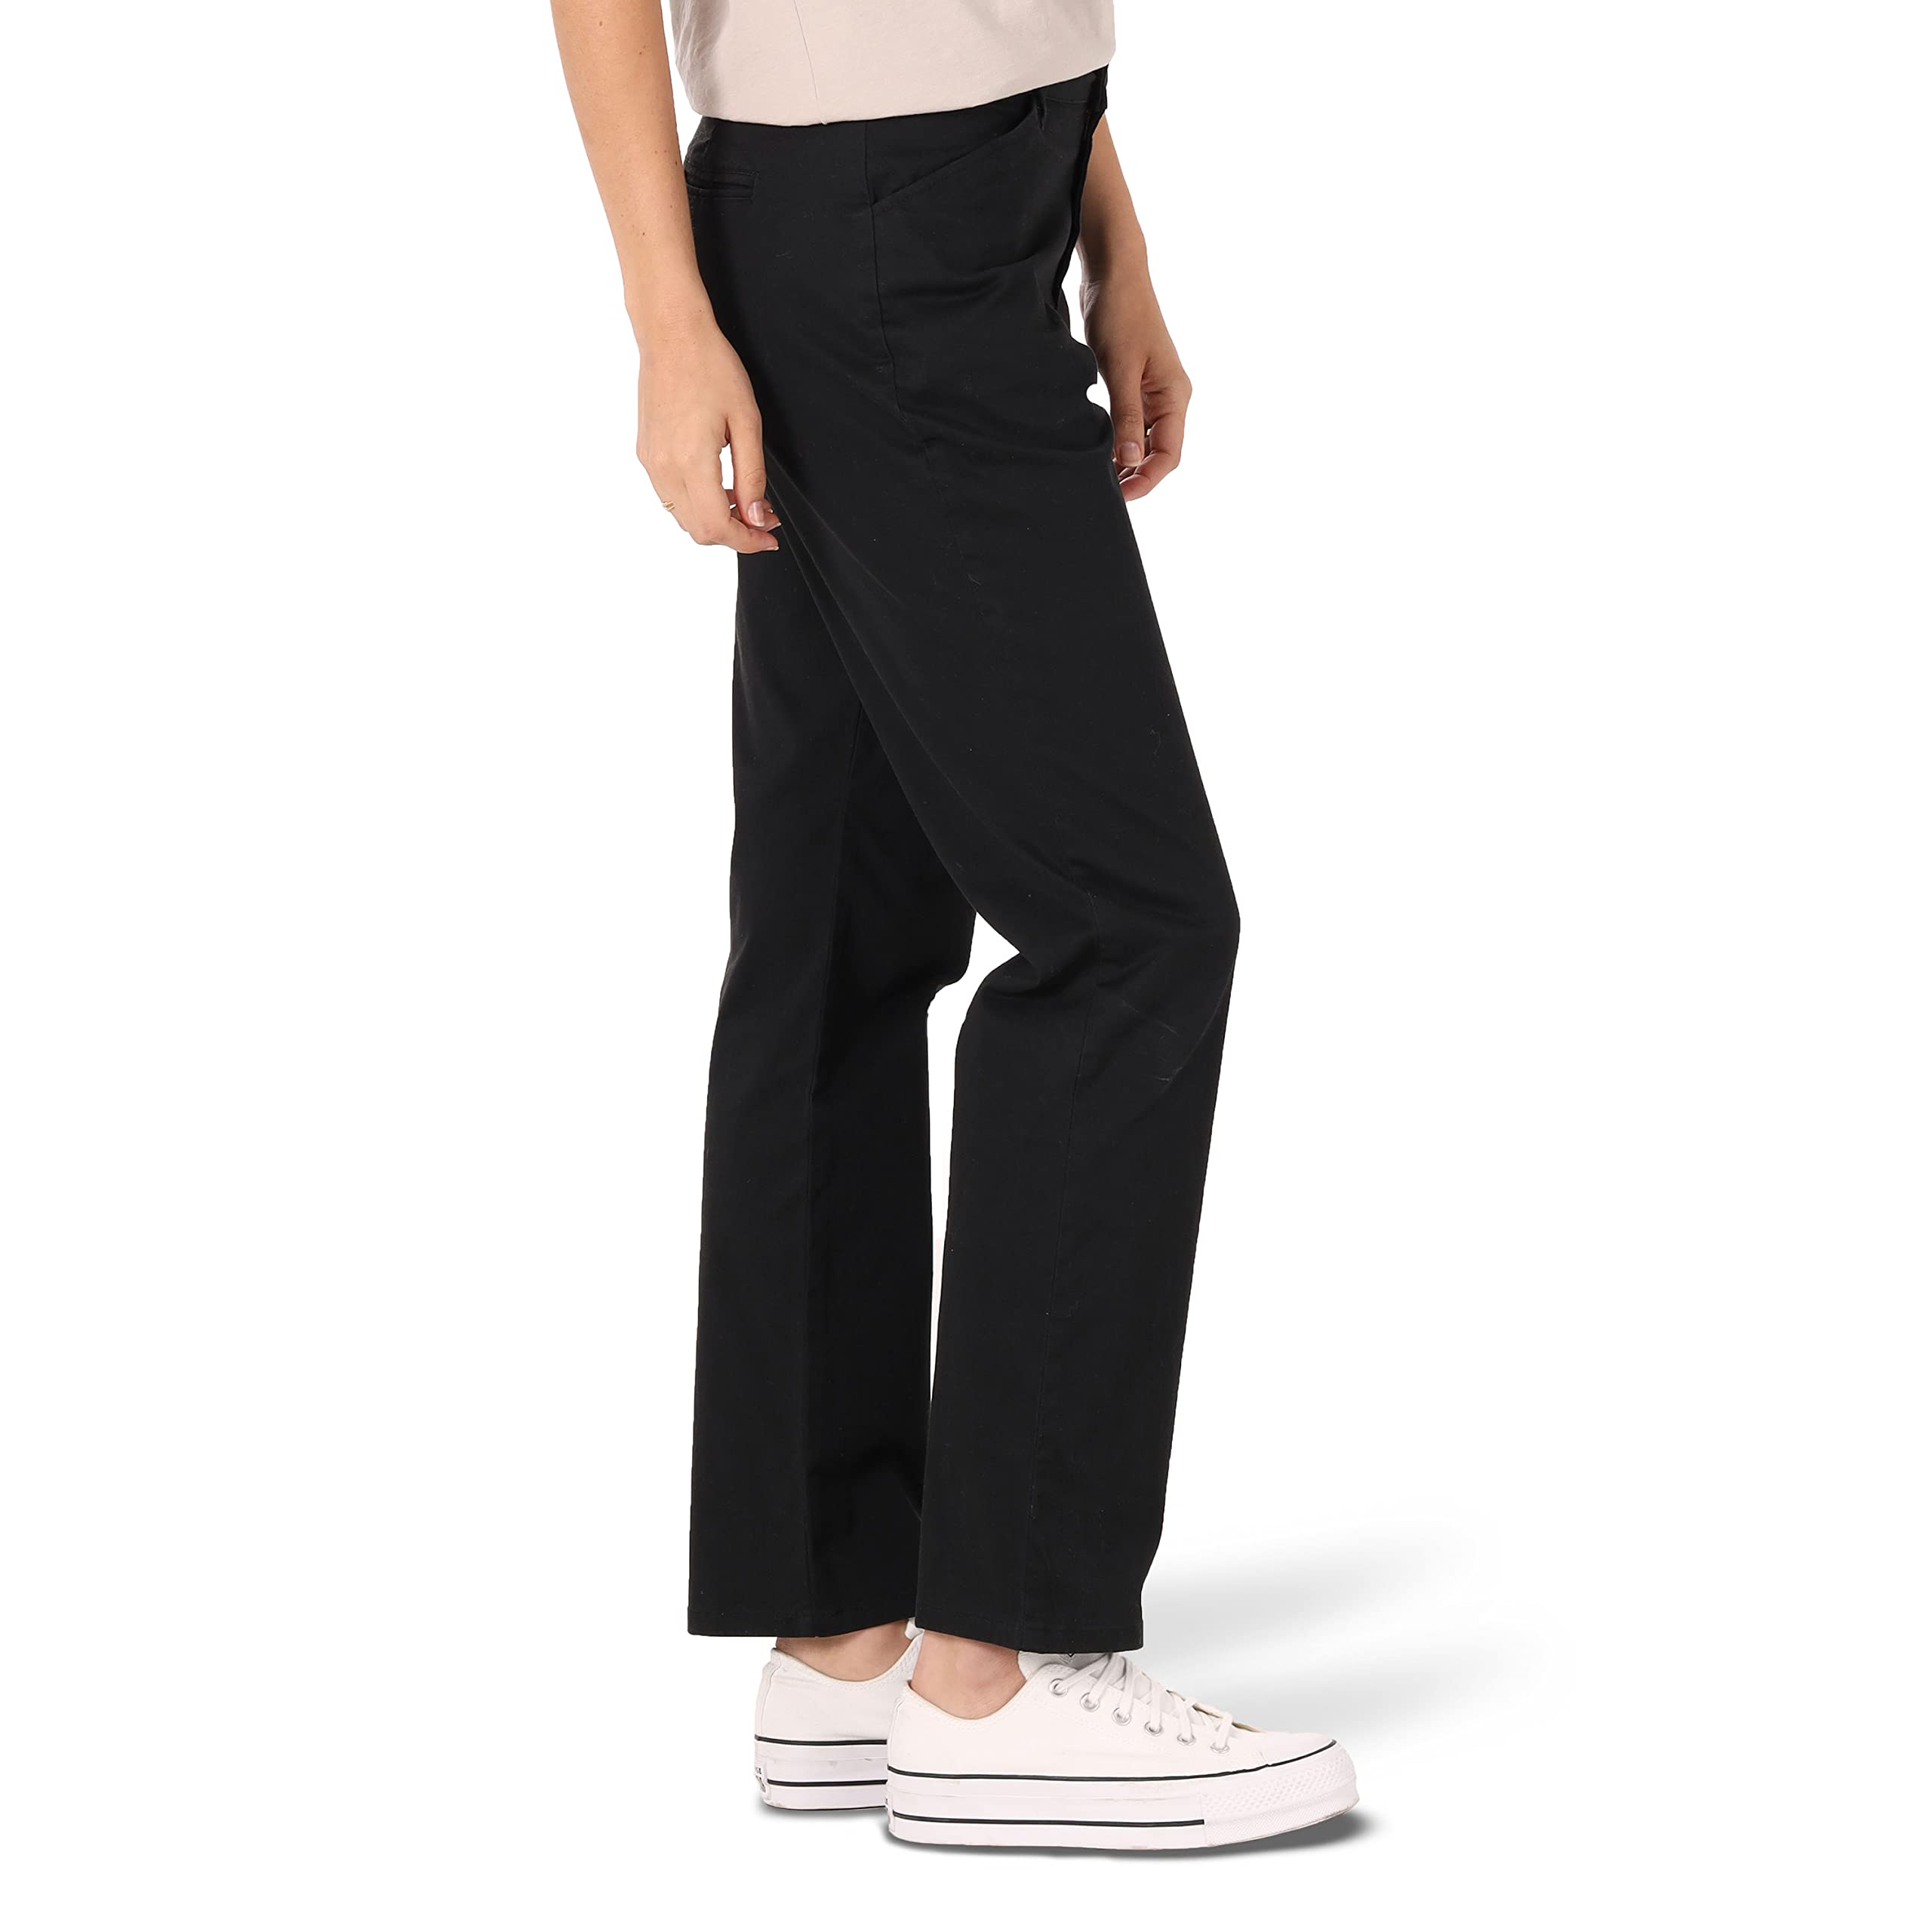 Lee Women's Petite Relaxed Fit All Day Straight Leg Pant